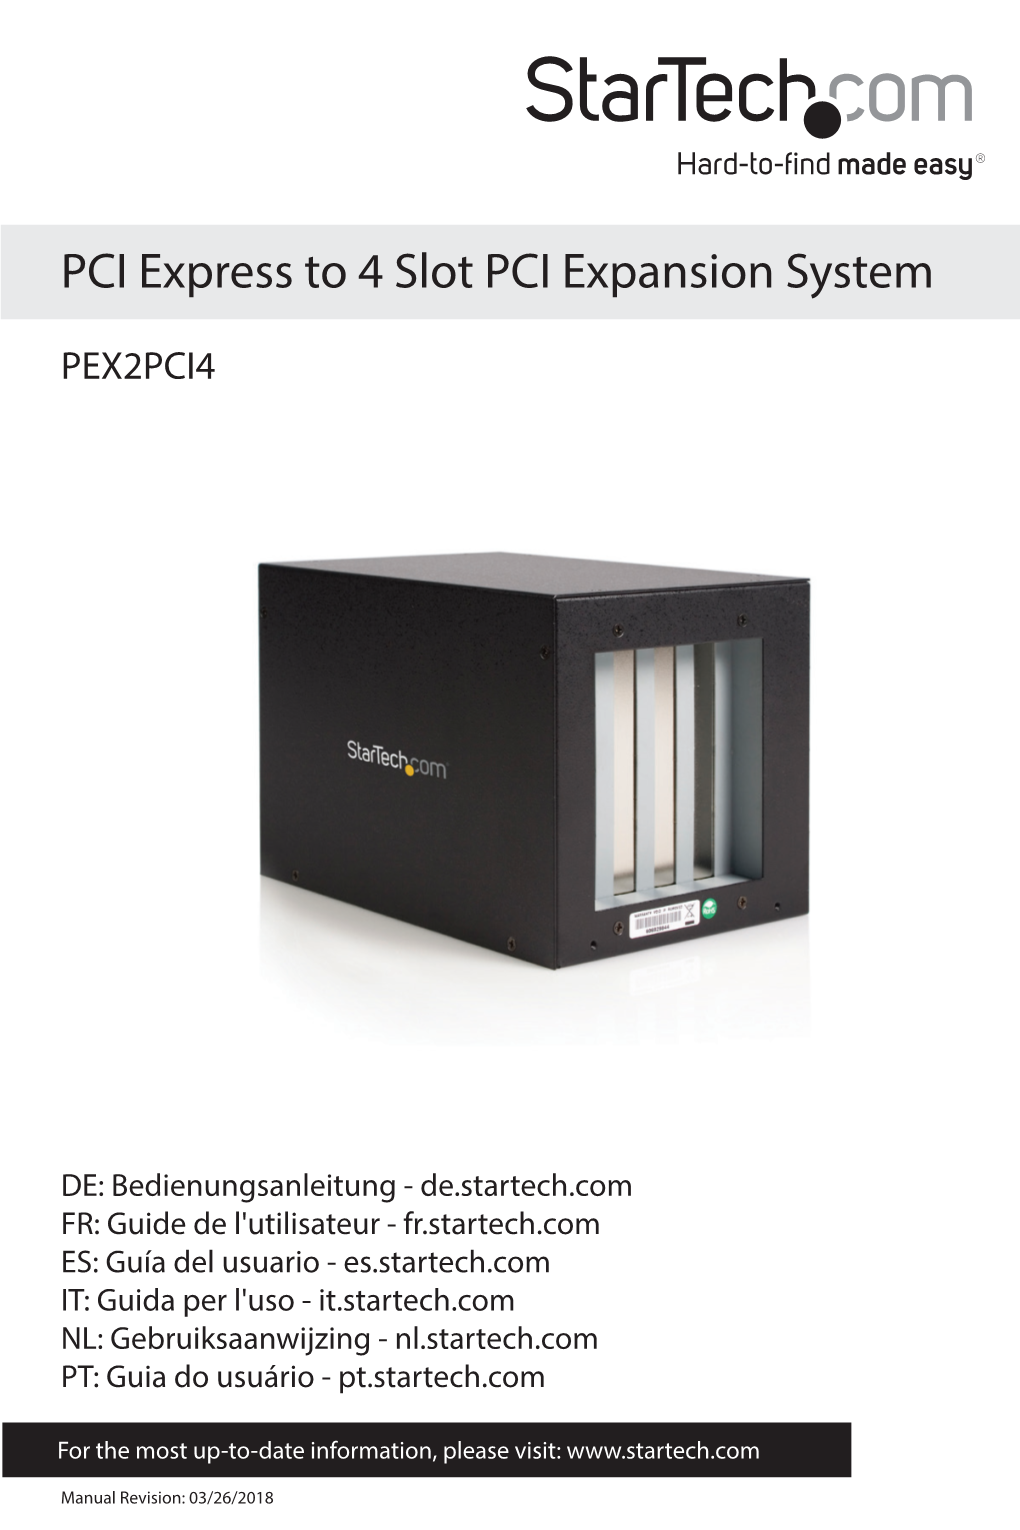 PCI Express to 4 Slot PCI Expansion System